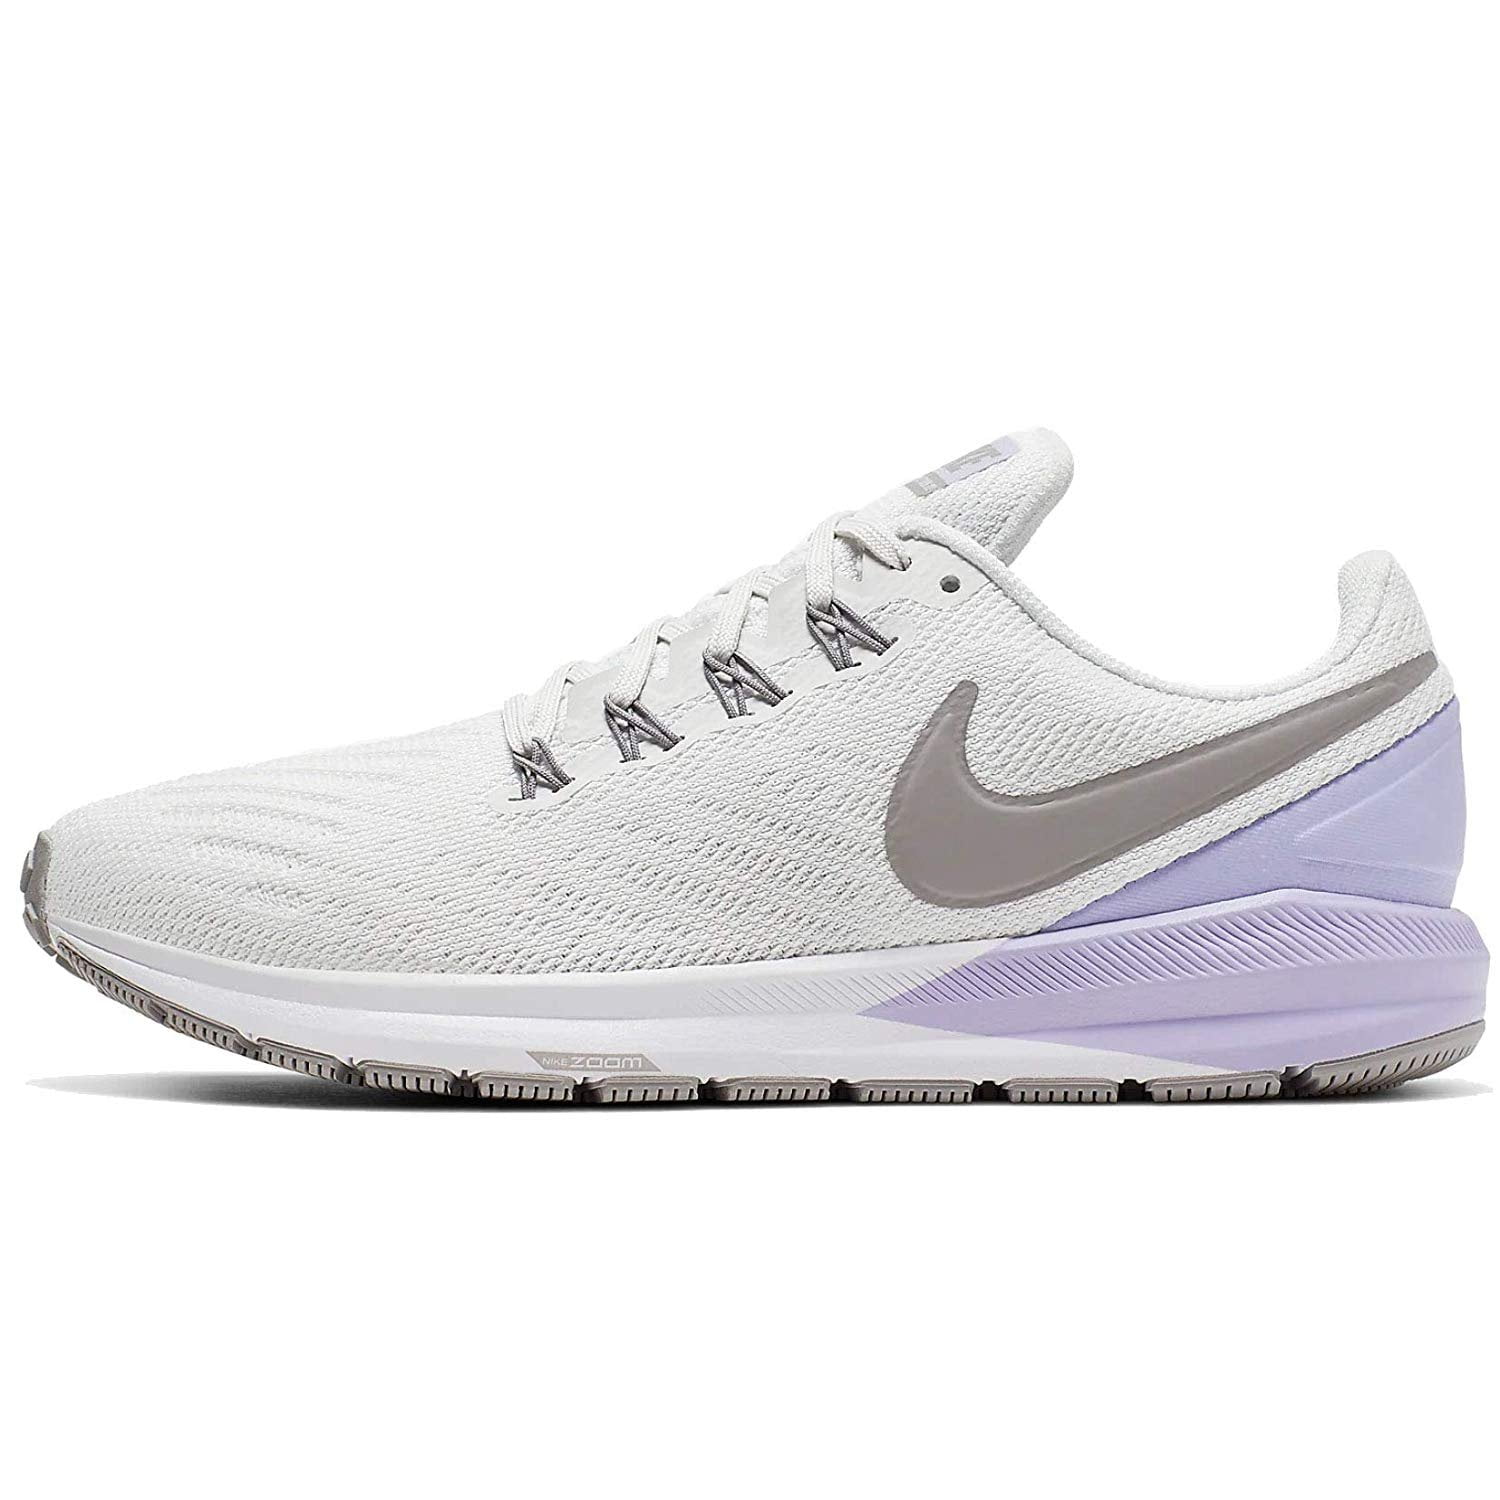 nike air zoom structure 22 Women's Shoe